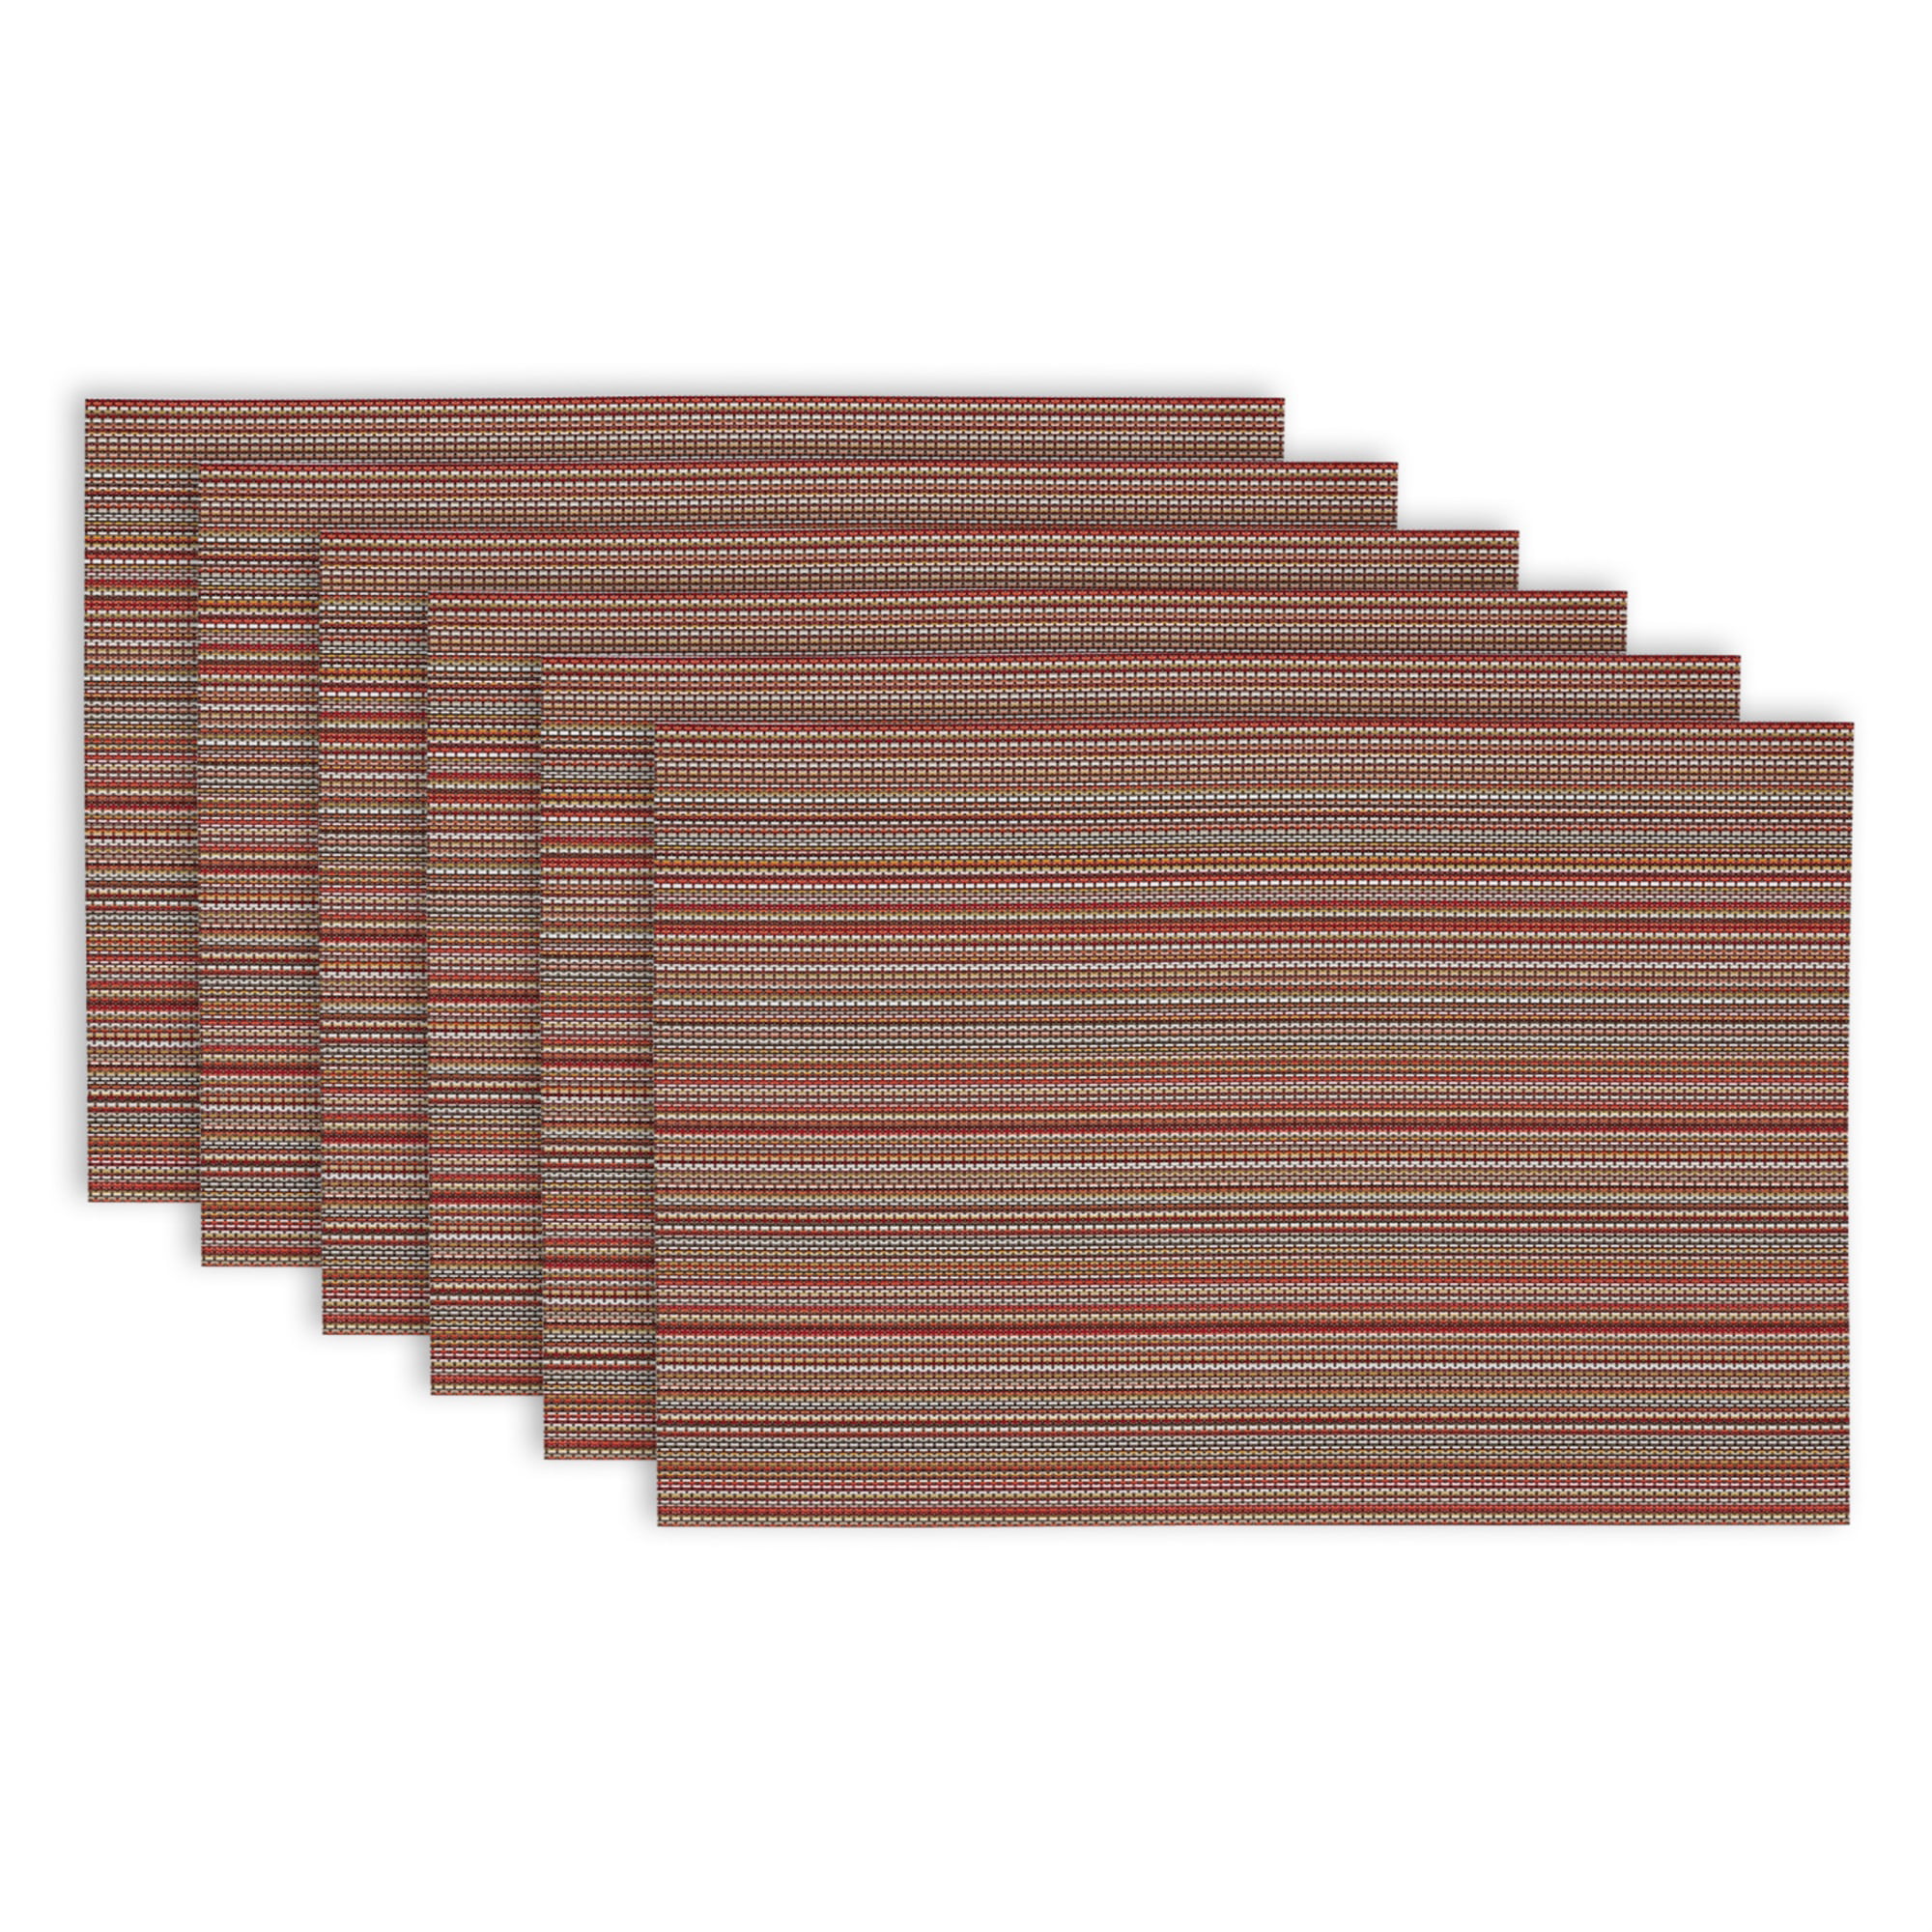 6 New 18" x 13" Brown Patterened Vinyl Woven Placemats